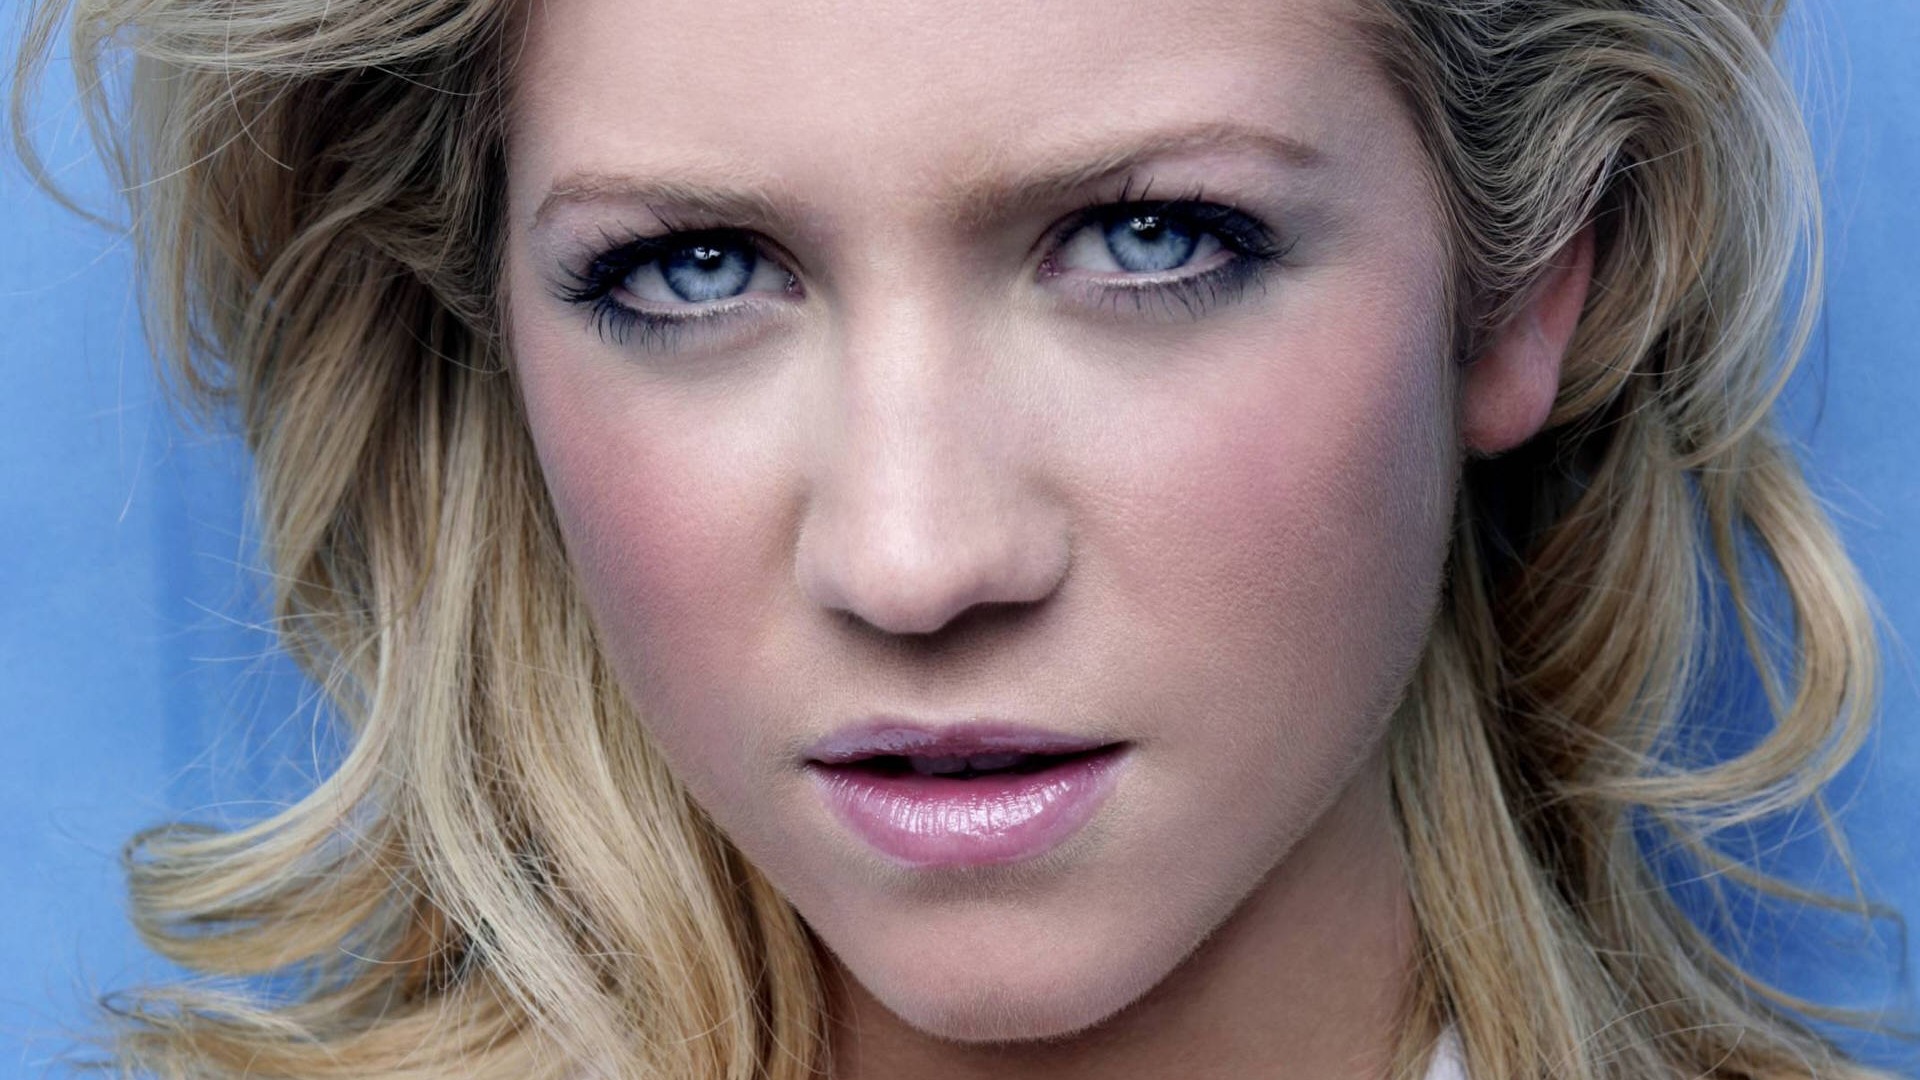 Snow wallpapers / Wallpaper Download - Brittany Snow #013 - 1920x1080 ...